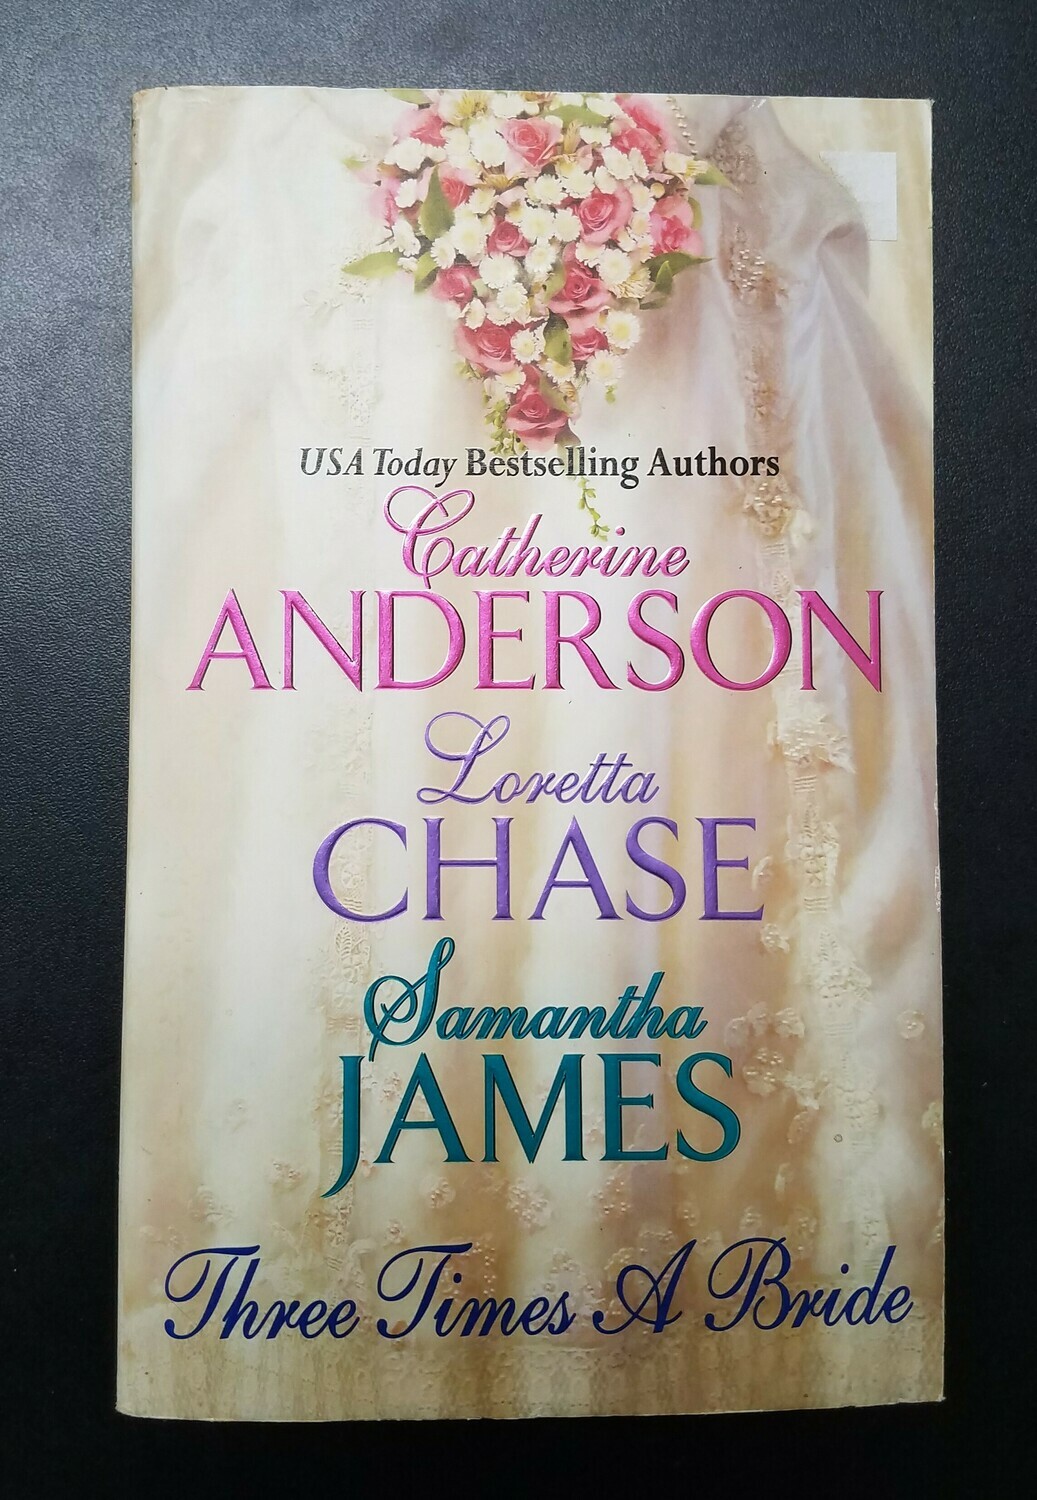 Three Times a Bride by Catherine Anderson, Loretta Chase, and Samantha James